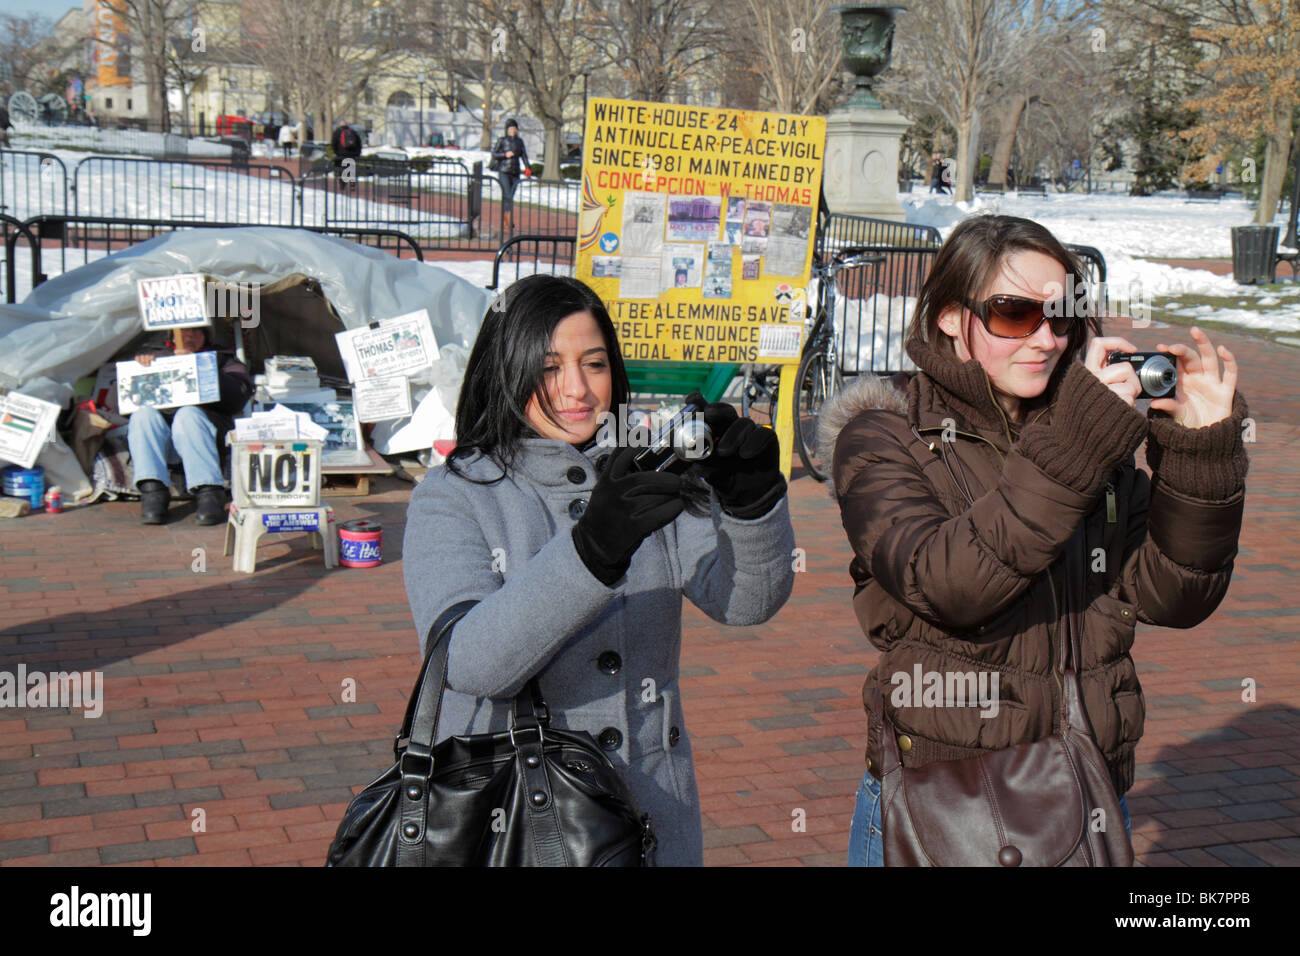 Washington DC,Lafayette Square,President's Park,White House,presidency,government,political protest,protester,sign,woman female women,young adult,taki Stock Photo